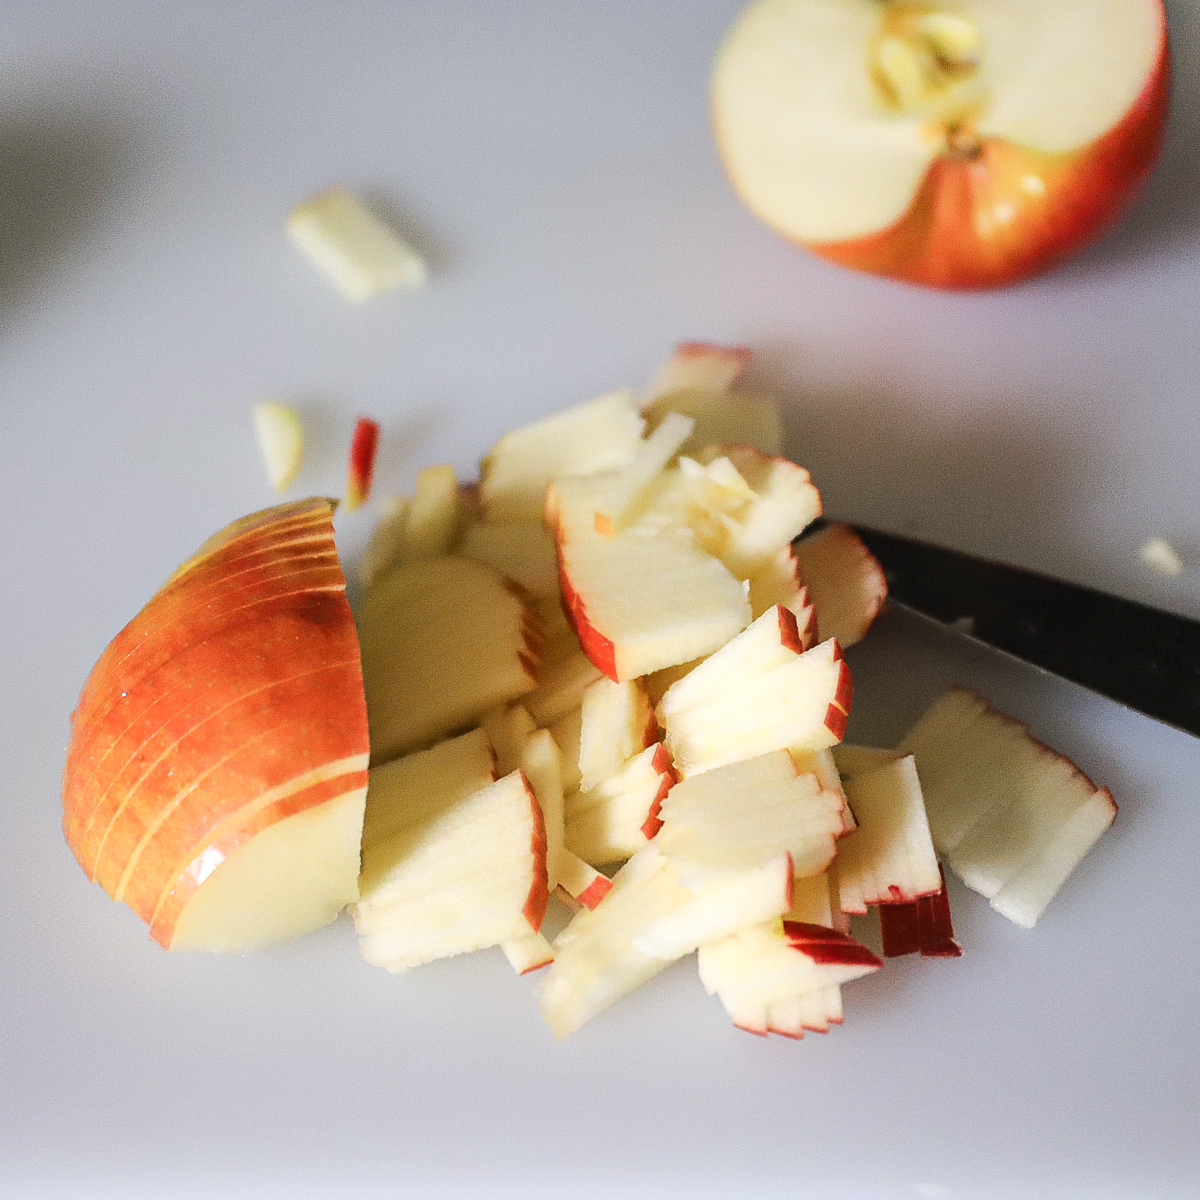 The half sliced apple is now sliced crossways making it into thin fine pieces for the salad.